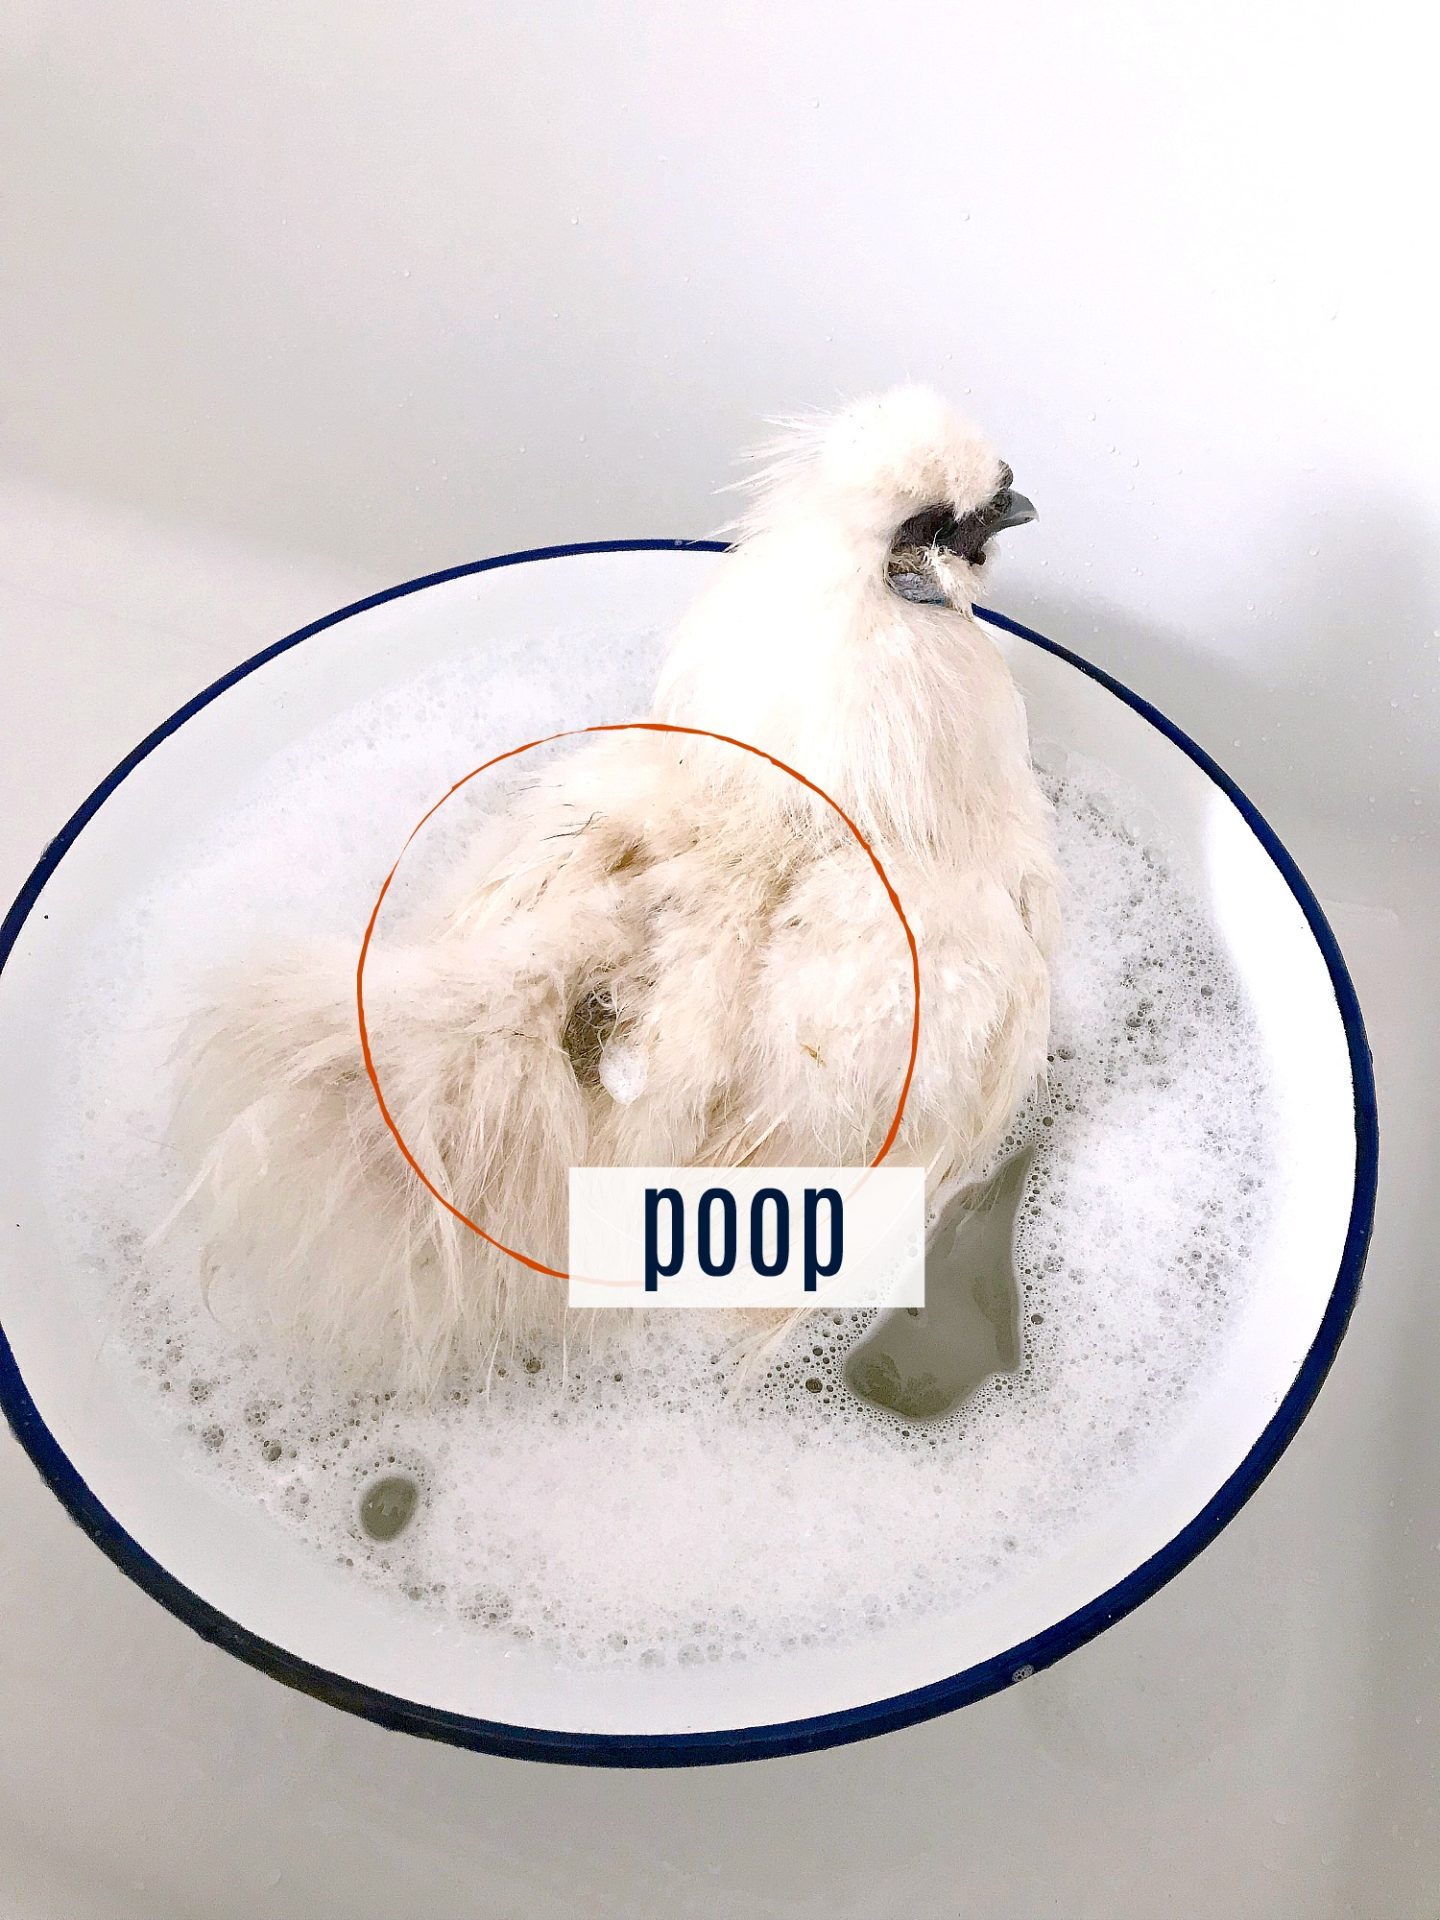 How to Bathe a Chicken